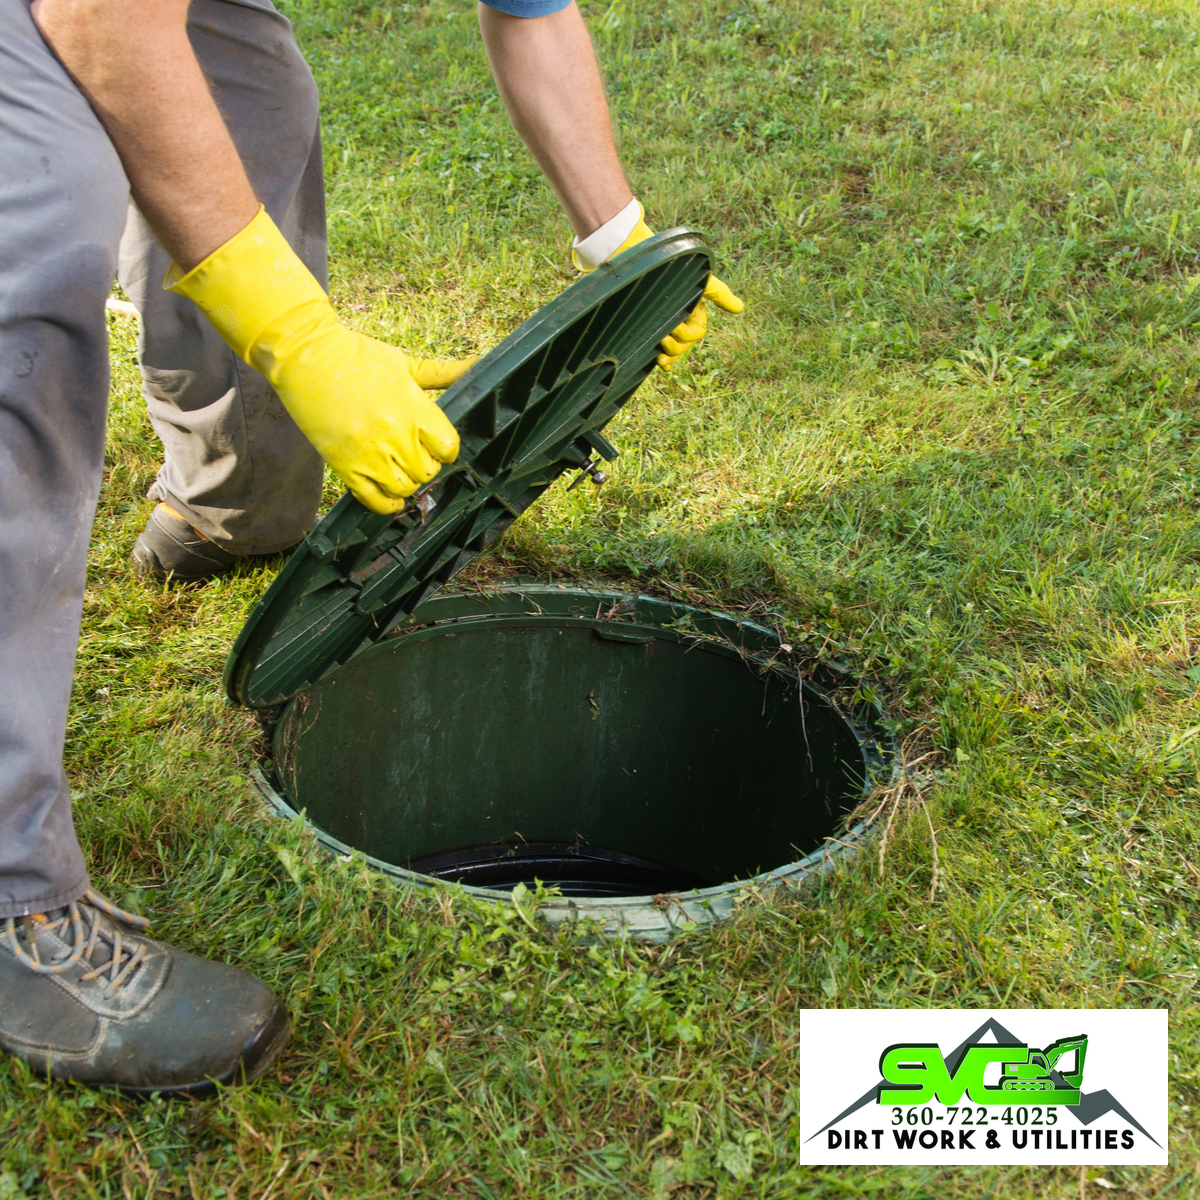 Talk With Us About Septic System Repair In Smokey Point